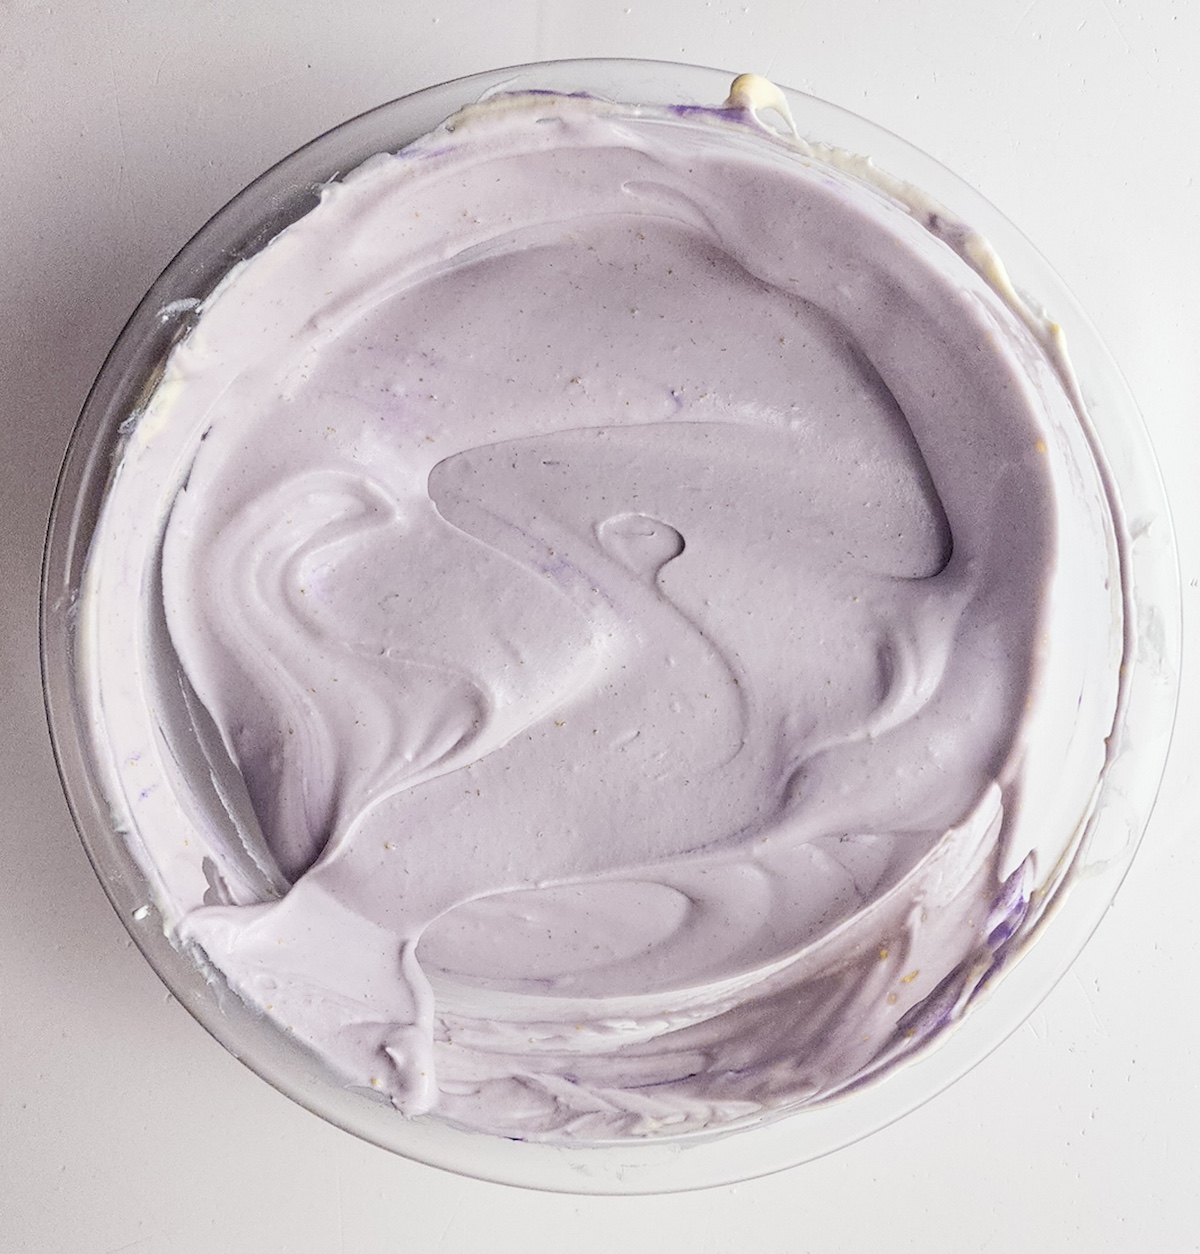 Color the custard with purple food coloring